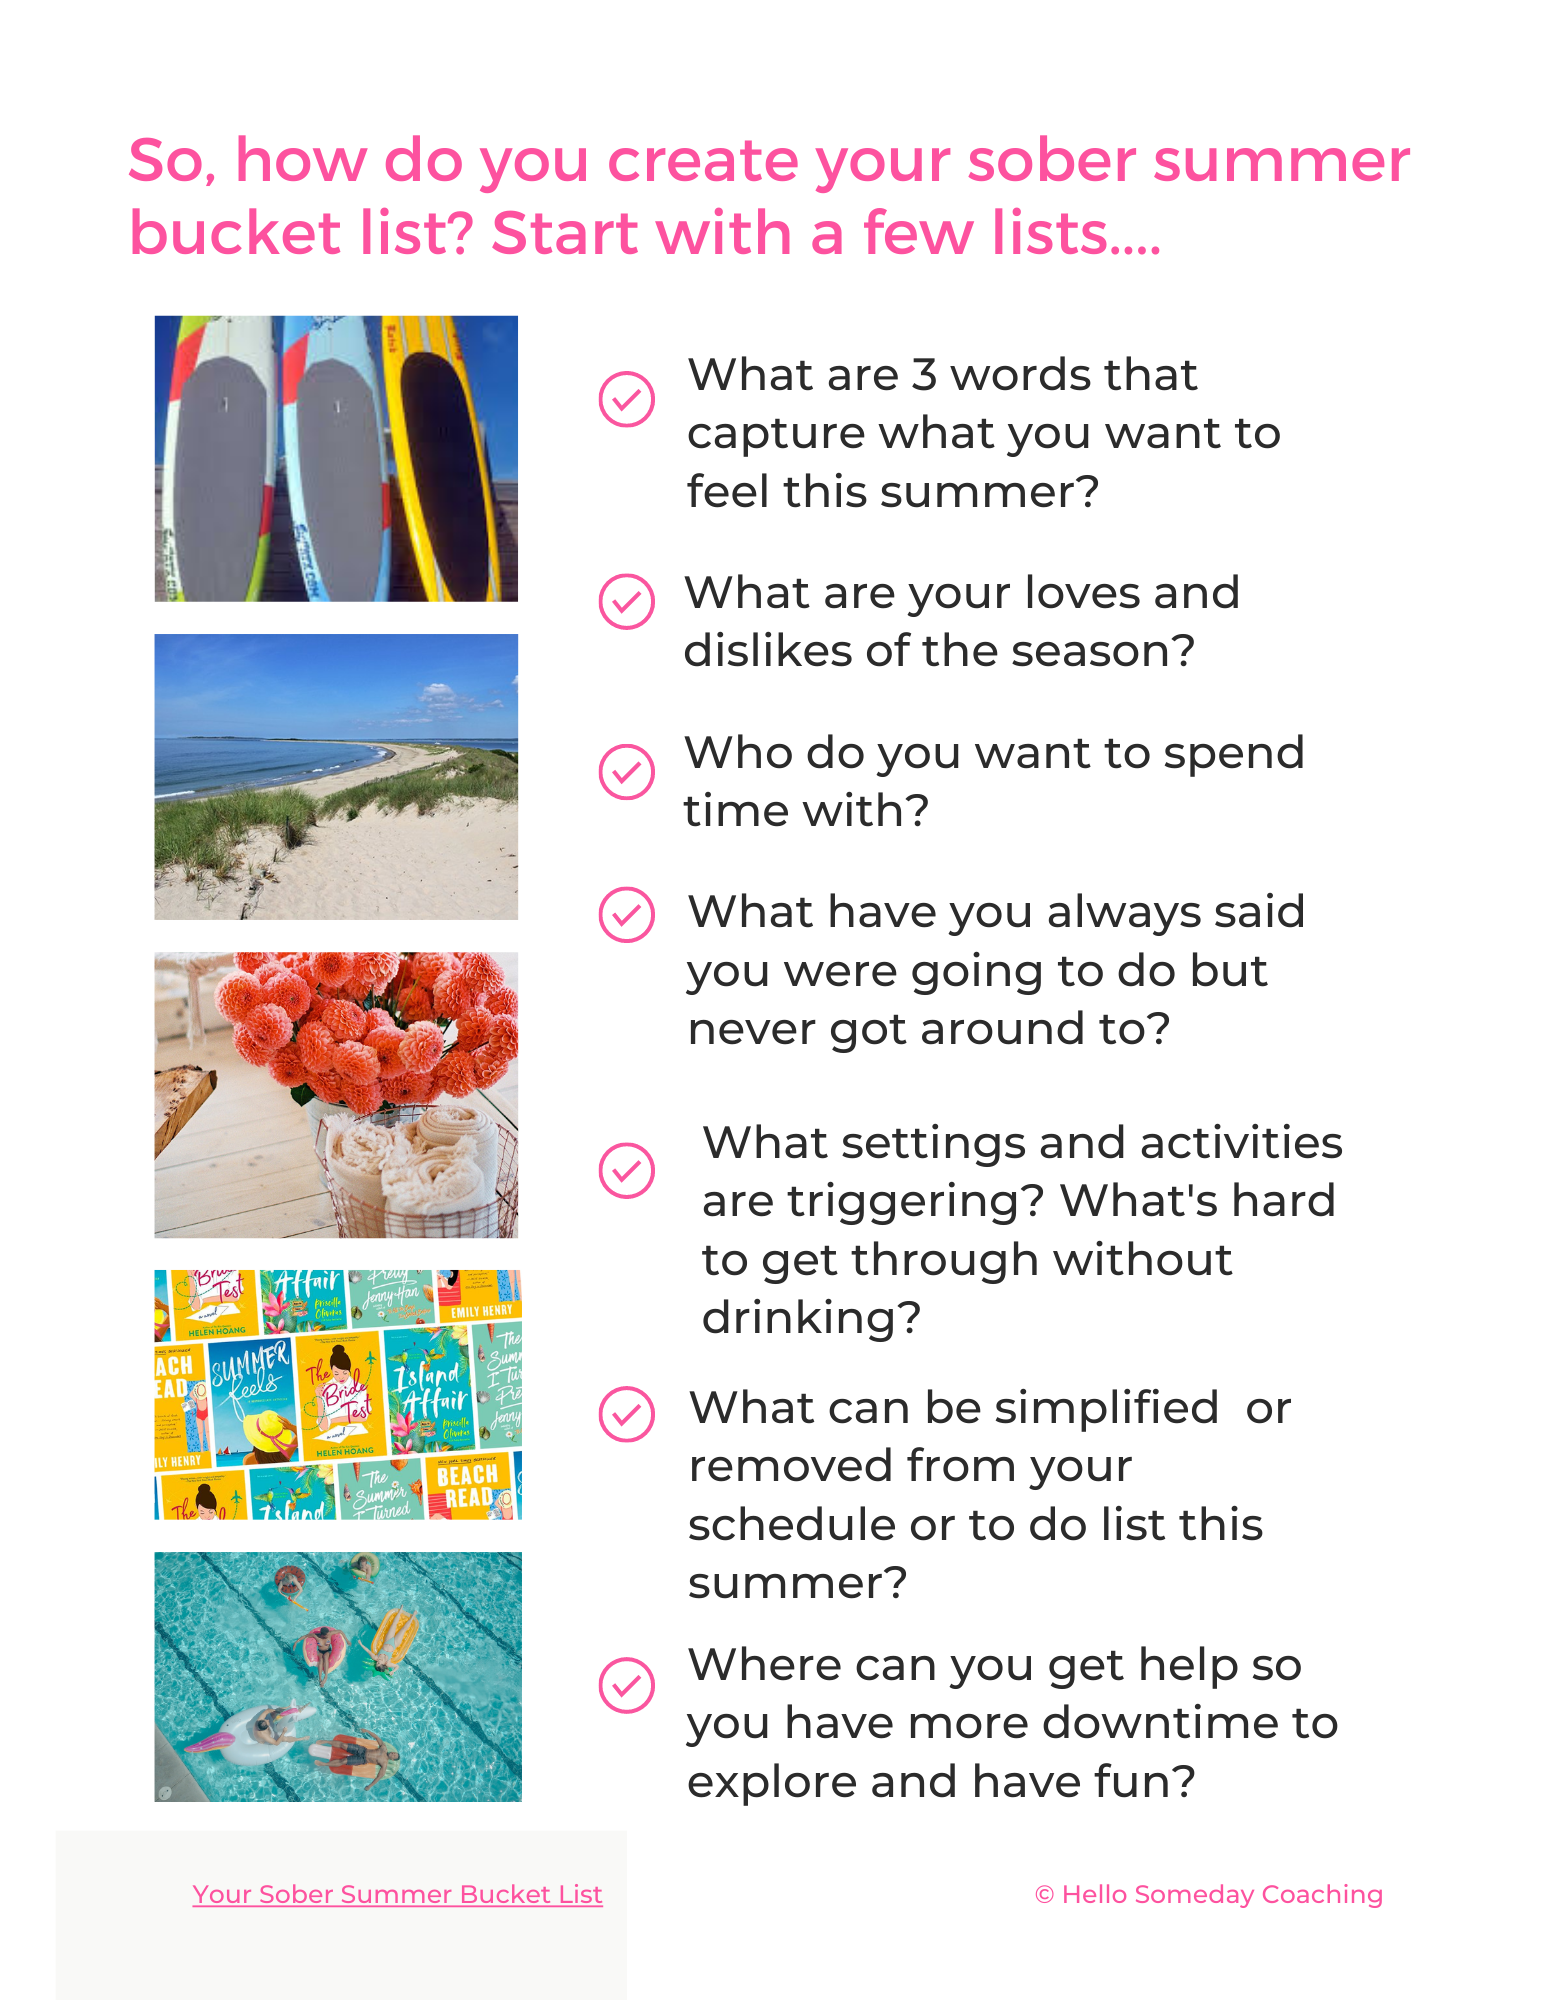 Ready for Alcohol-Free Fun in Dry July and To Have An Amazing Sober Summer? Here's How To Create A Sober Summer Bucket List For Women Quitting Drinking. Join The Sobriety Starter Kit For More Support. 